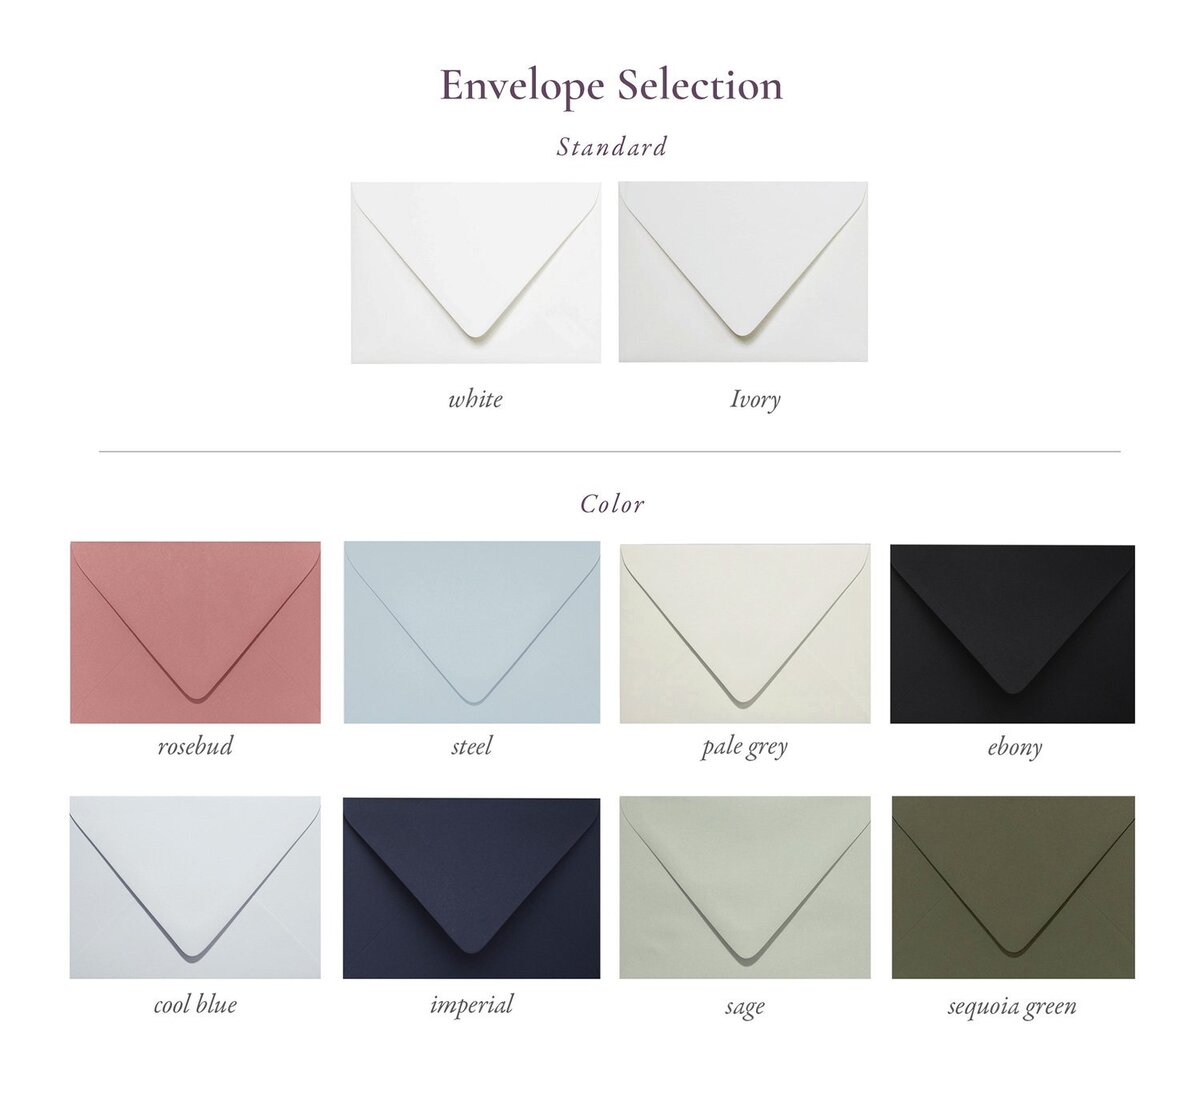 Envelope selections and color palette for wedding stationery